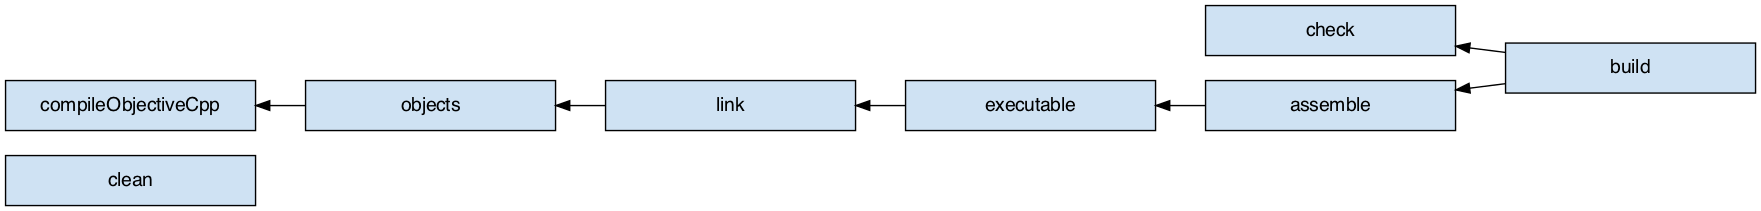 objective cpp application task graph